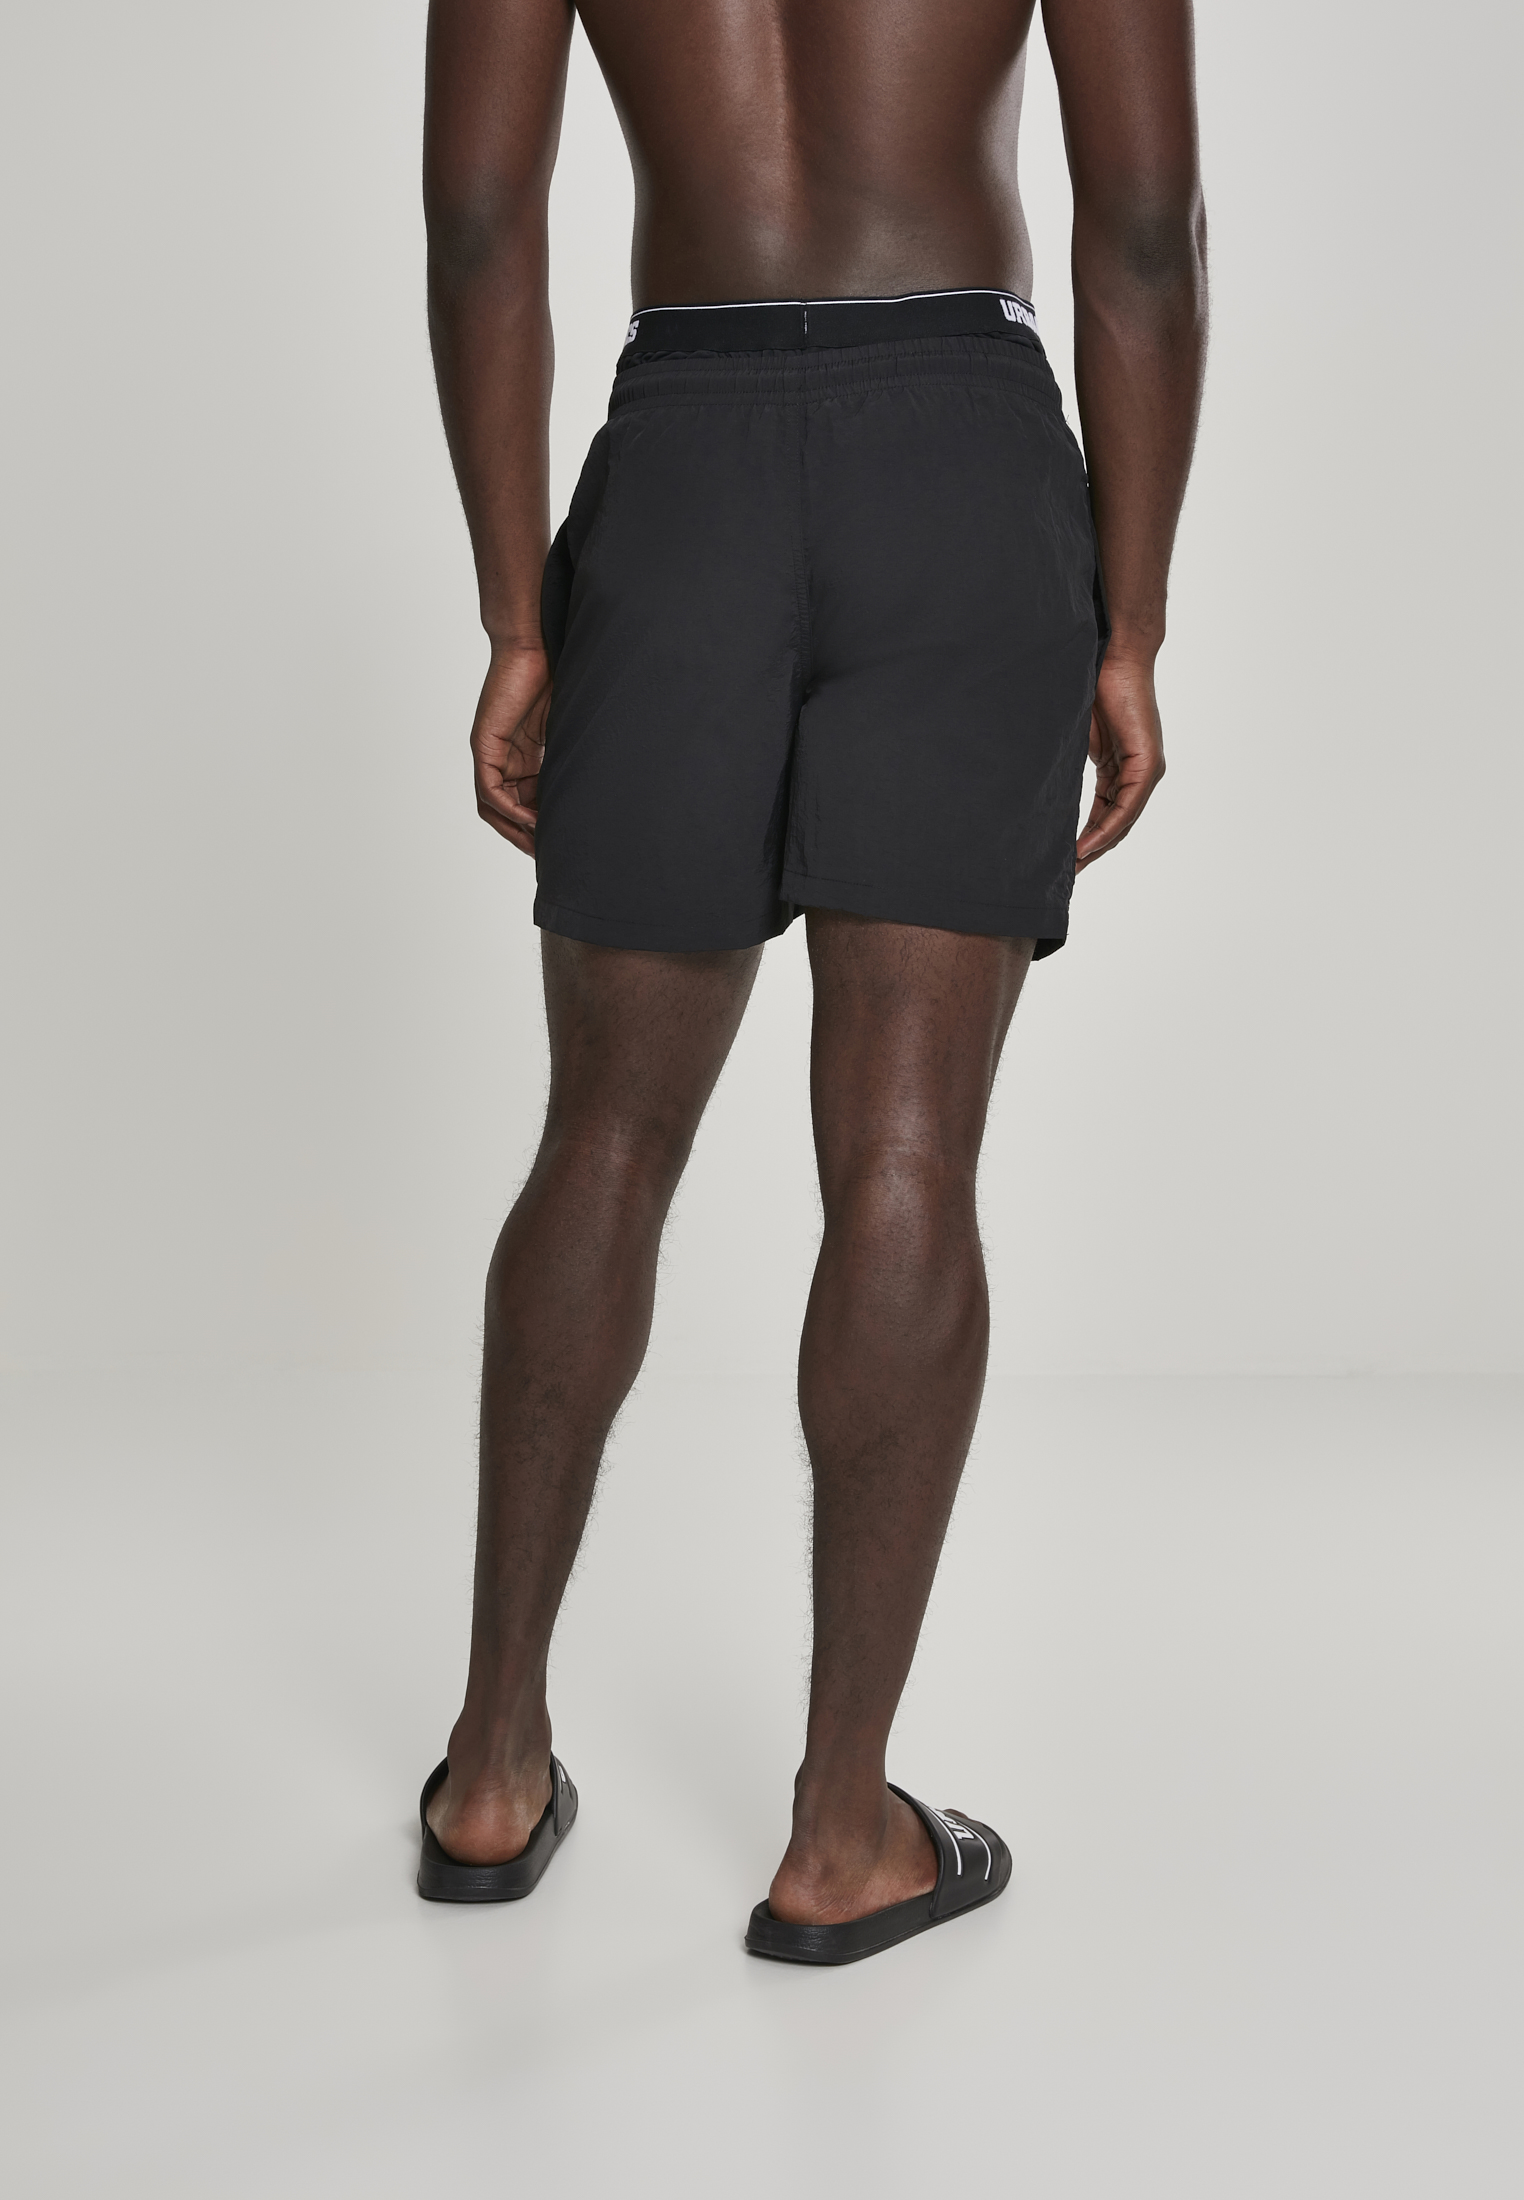 Bademode Two in One Swim Shorts in Farbe blk/blk/wht